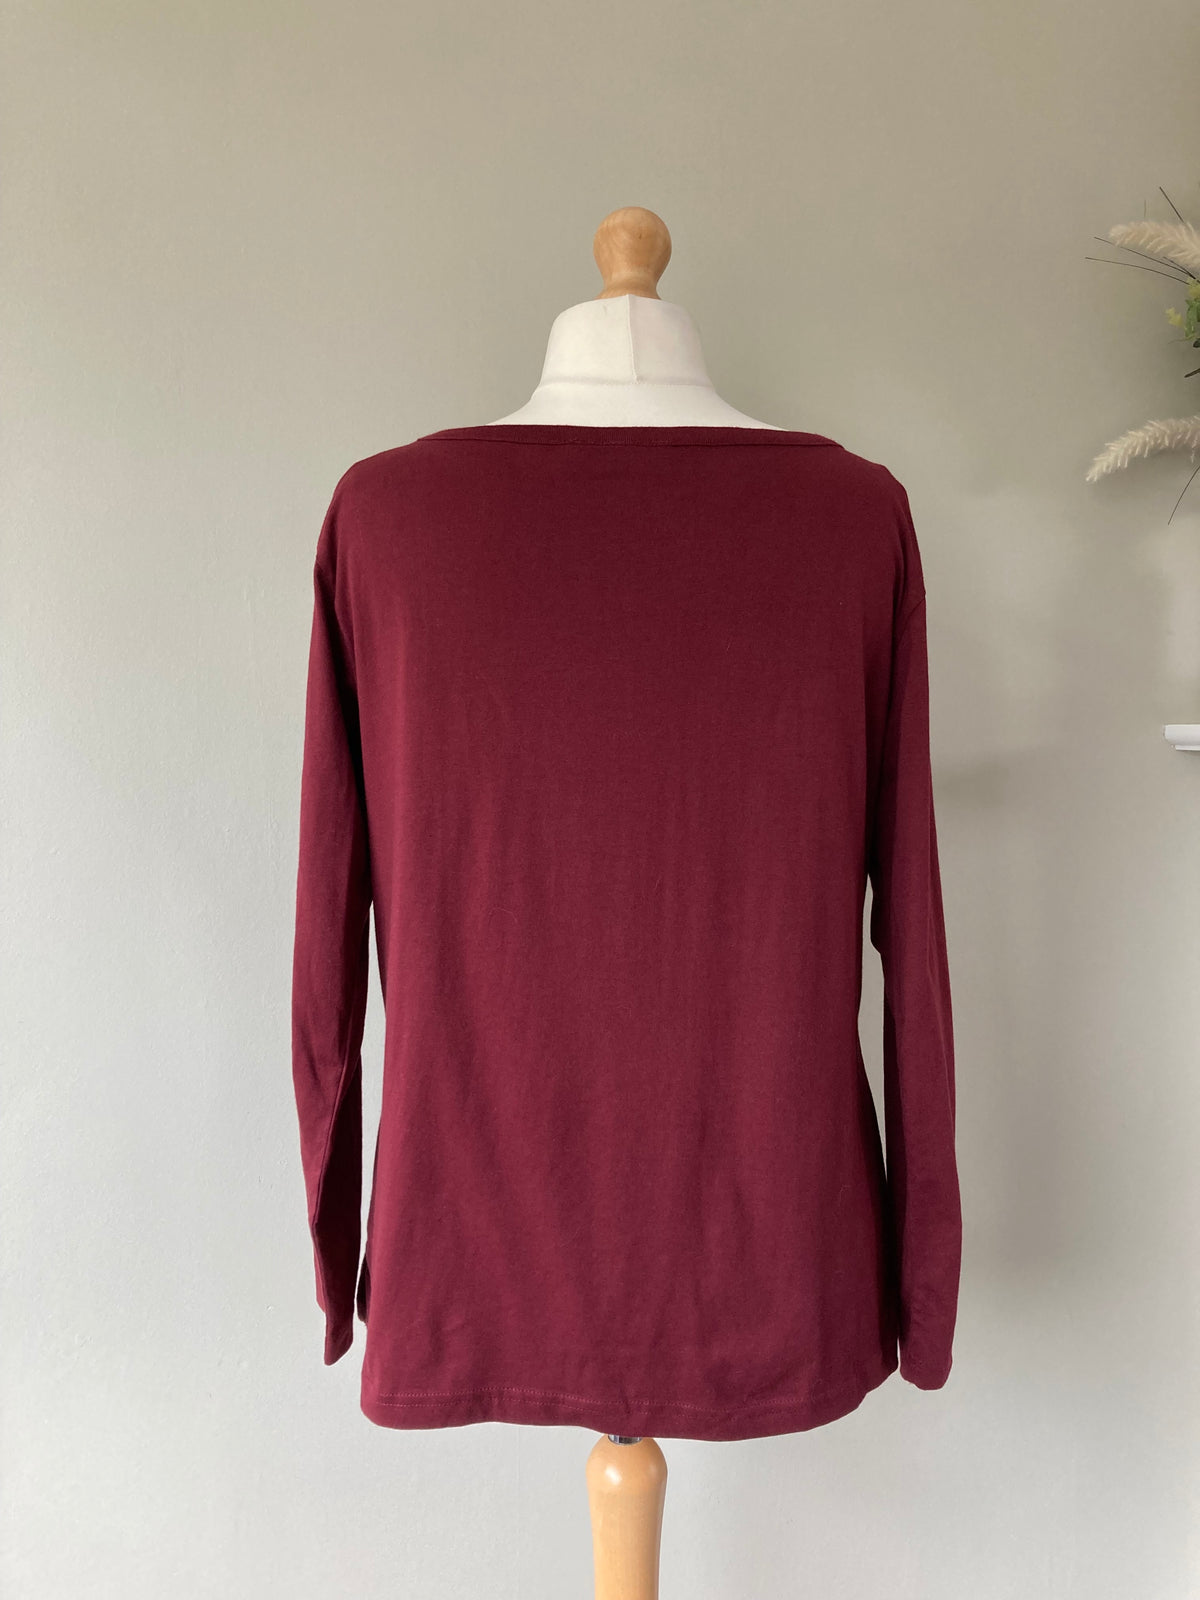 Burgundy long sleeved top by BPC - Size 12/14